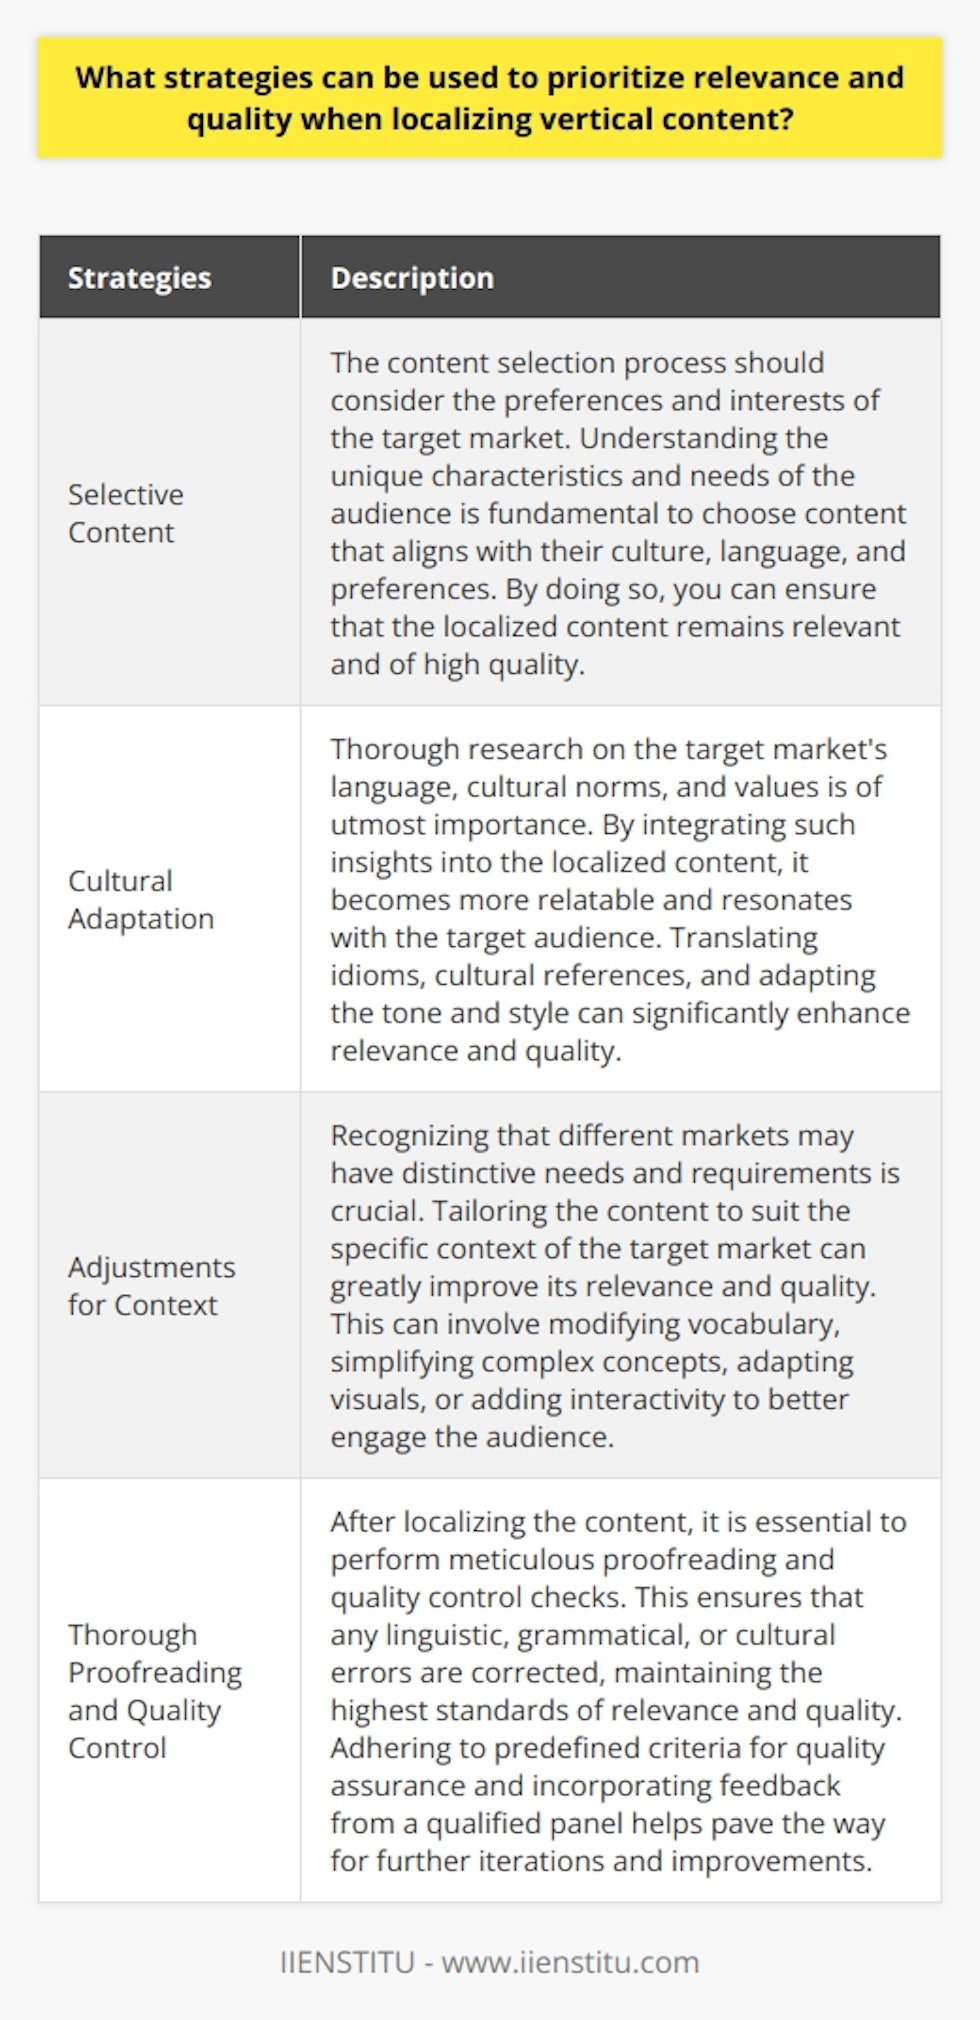 When localizing vertical content, it is crucial to prioritize relevance and quality. Localization involves adapting content to the target audience, language, location, or culture, ensuring that it resonates with them. To achieve this, various strategies can be employed:1. Selective Content: The content selection process should consider the preferences and interests of the target market. Understanding the unique characteristics and needs of the audience is fundamental to choose content that aligns with their culture, language, and preferences. By doing so, you can ensure that the localized content remains relevant and of high quality.2. Cultural Adaptation: Thorough research on the target market's language, cultural norms, and values is of utmost importance. By integrating such insights into the localized content, it becomes more relatable and resonates with the target audience. Translating idioms, cultural references, and adapting the tone and style can significantly enhance relevance and quality.3. Adjustments for Context: Recognizing that different markets may have distinctive needs and requirements is crucial. Tailoring the content to suit the specific context of the target market can greatly improve its relevance and quality. This can involve modifying vocabulary, simplifying complex concepts, adapting visuals, or adding interactivity to better engage the audience.4. Thorough Proofreading and Quality Control: After localizing the content, it is essential to perform meticulous proofreading and quality control checks. This ensures that any linguistic, grammatical, or cultural errors are corrected, maintaining the highest standards of relevance and quality. Adhering to predefined criteria for quality assurance and incorporating feedback from a qualified panel helps pave the way for further iterations and improvements.In conclusion, prioritizing relevance and quality when localizing vertical content is vital to achieve success. By carefully selecting content, adapting it to the target market's language and cultural preferences, making necessary contextual adjustments, and conducting thorough proofreading and quality control, you can deliver localized content that resonates with the audience and meets their expectations.